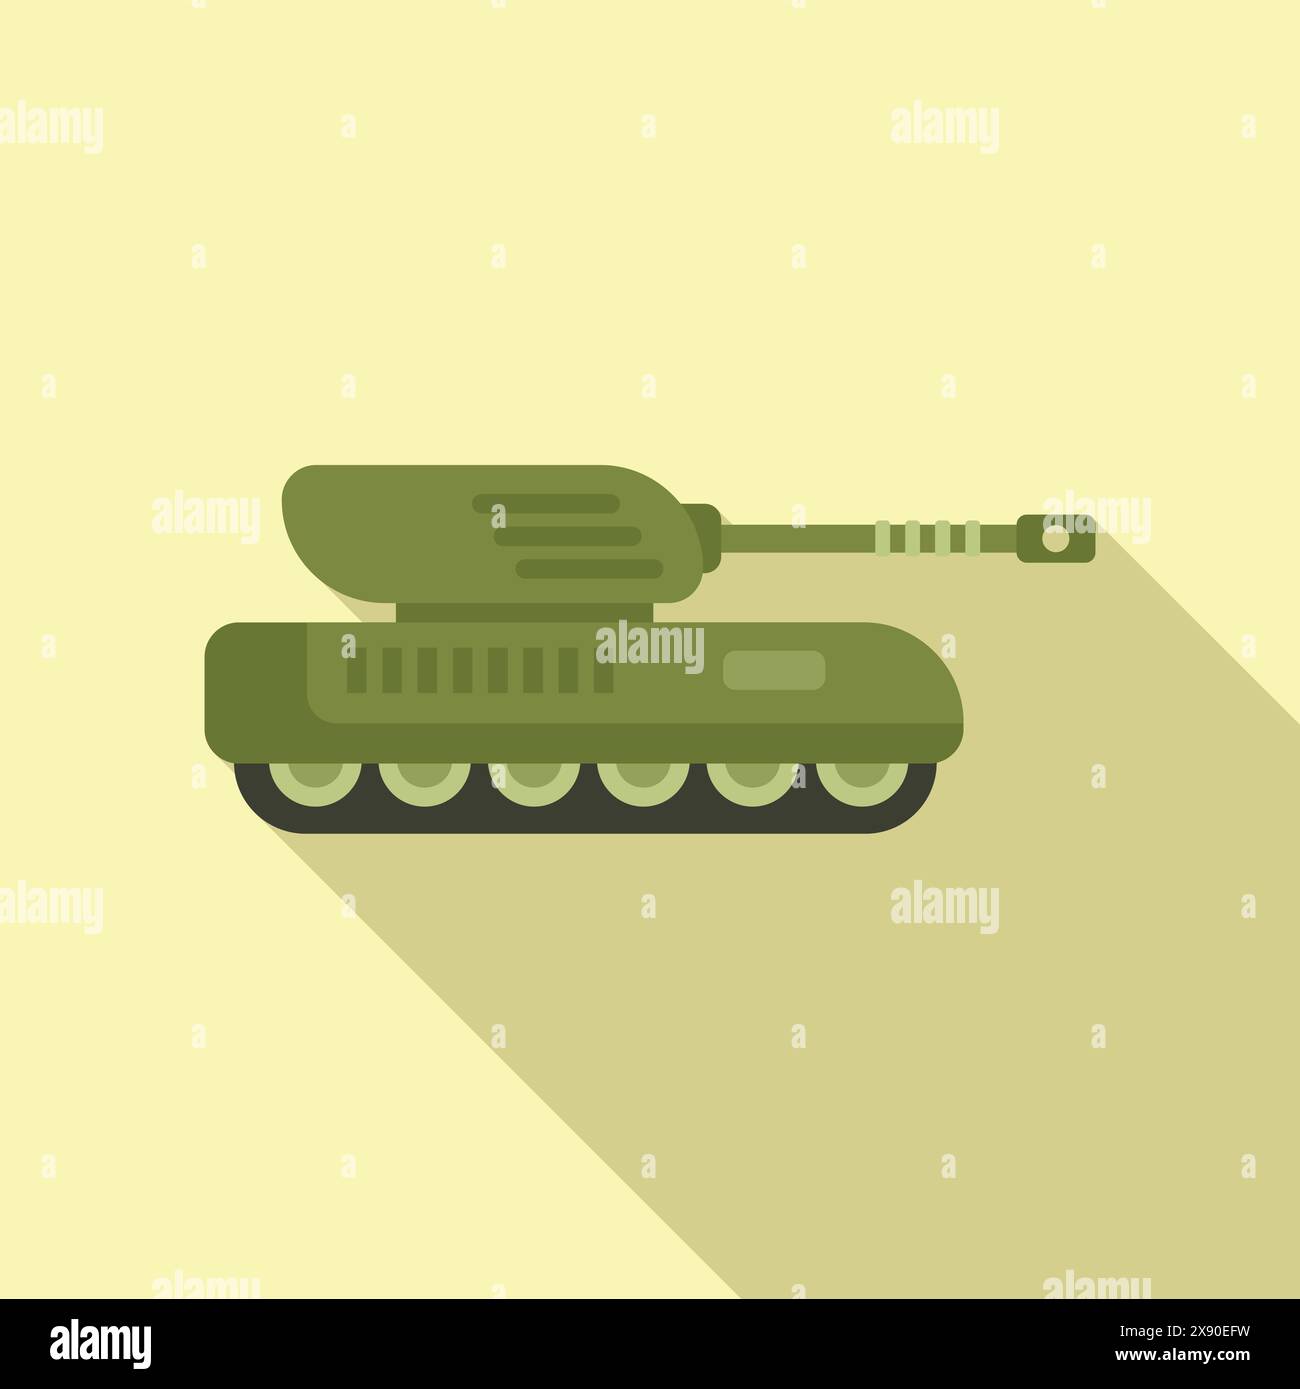 Detailed cartoon military tank illustration in green. Flat design. Isolated on beige background. Featuring vector artwork. Armored warfare vehicle. With artillery cannon. Machine silhouette Stock Vector